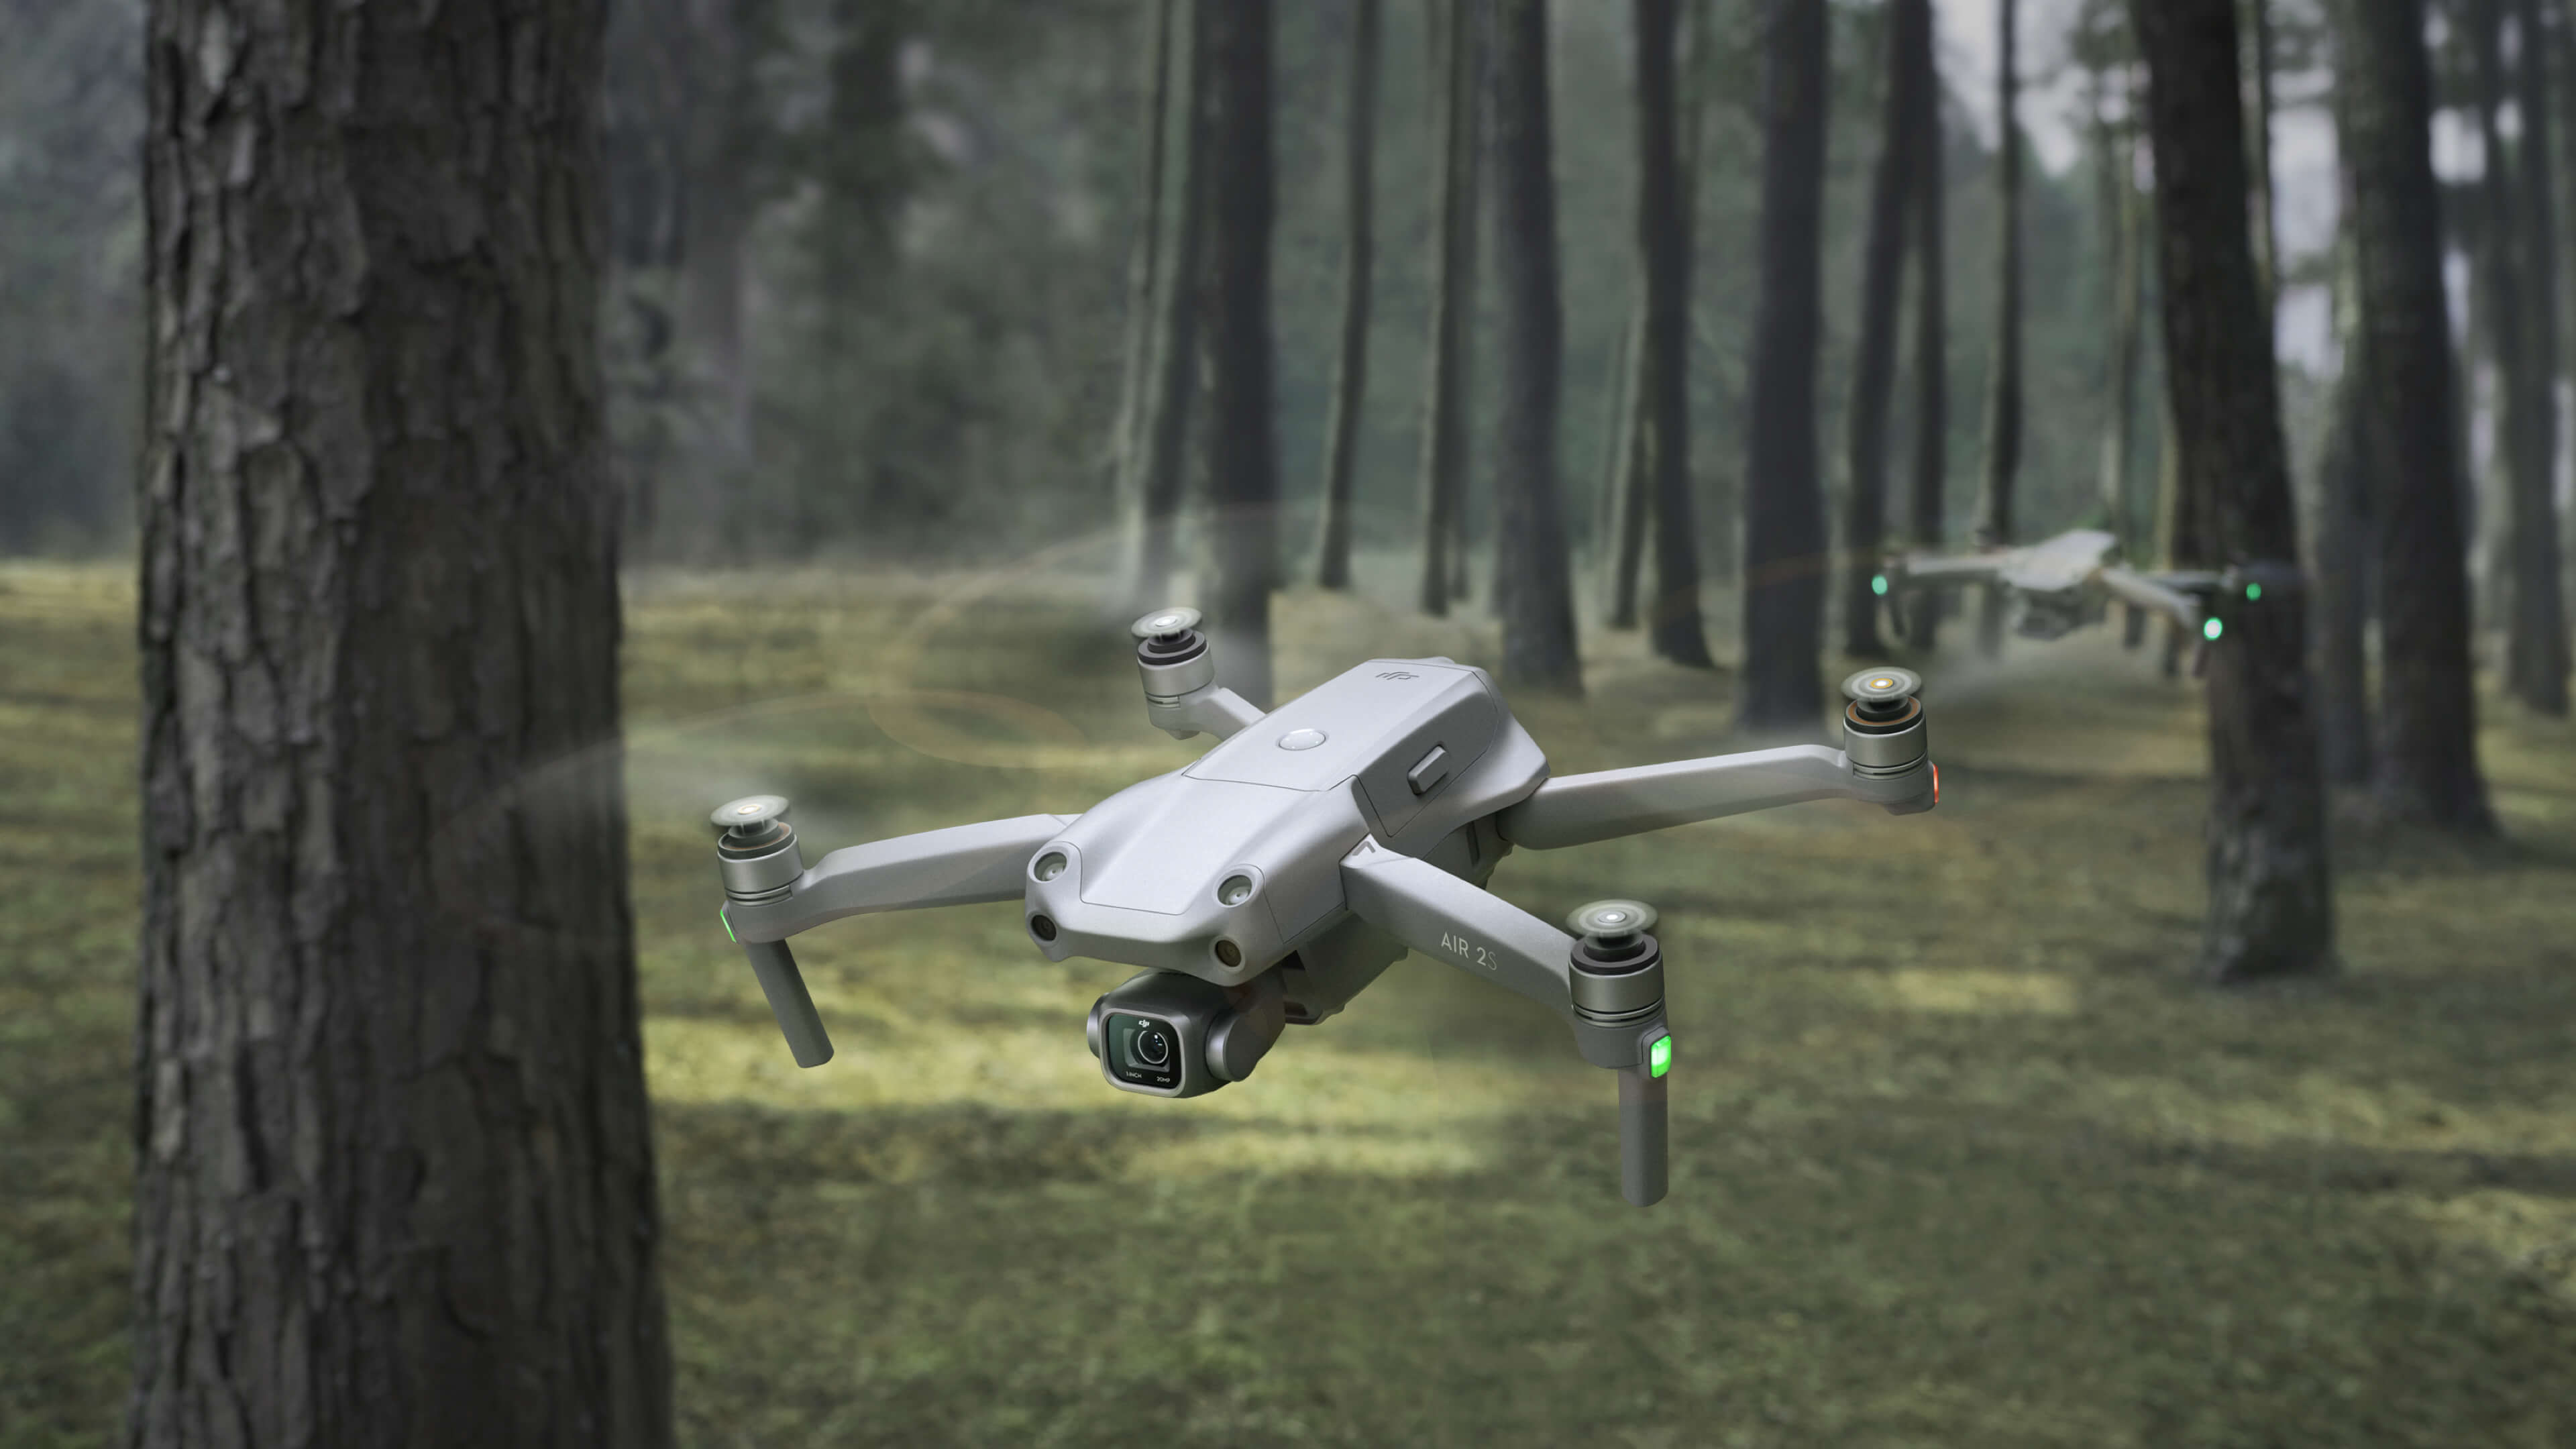 DJI Air 2S, Mini 2, and Mini SE drones can now get new features